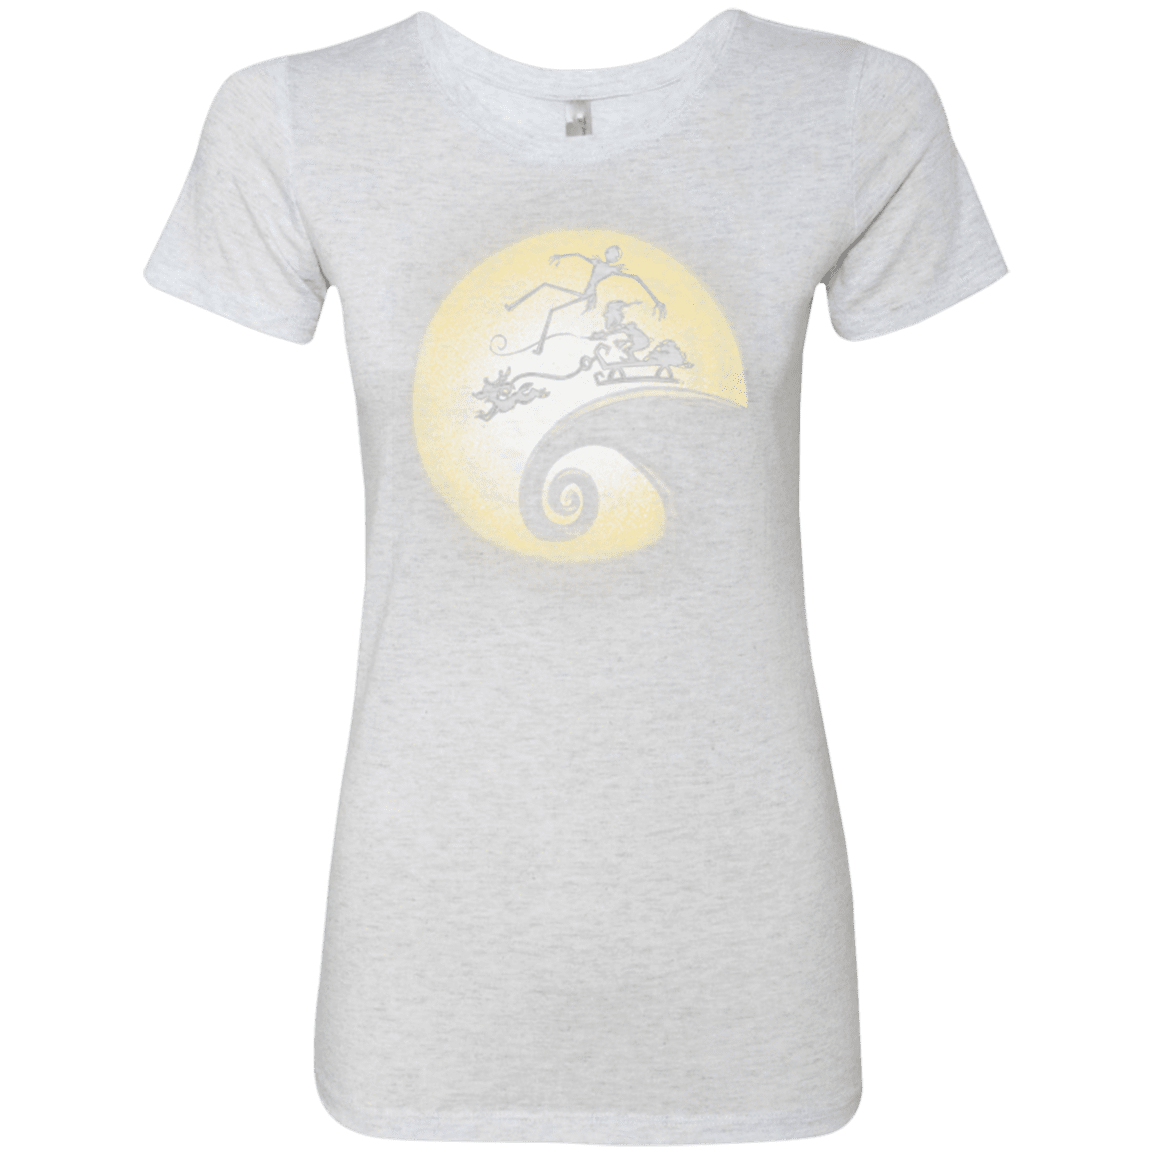 T-Shirts Heather White / Small The Nightmare Before Grinchmas Women's Triblend T-Shirt